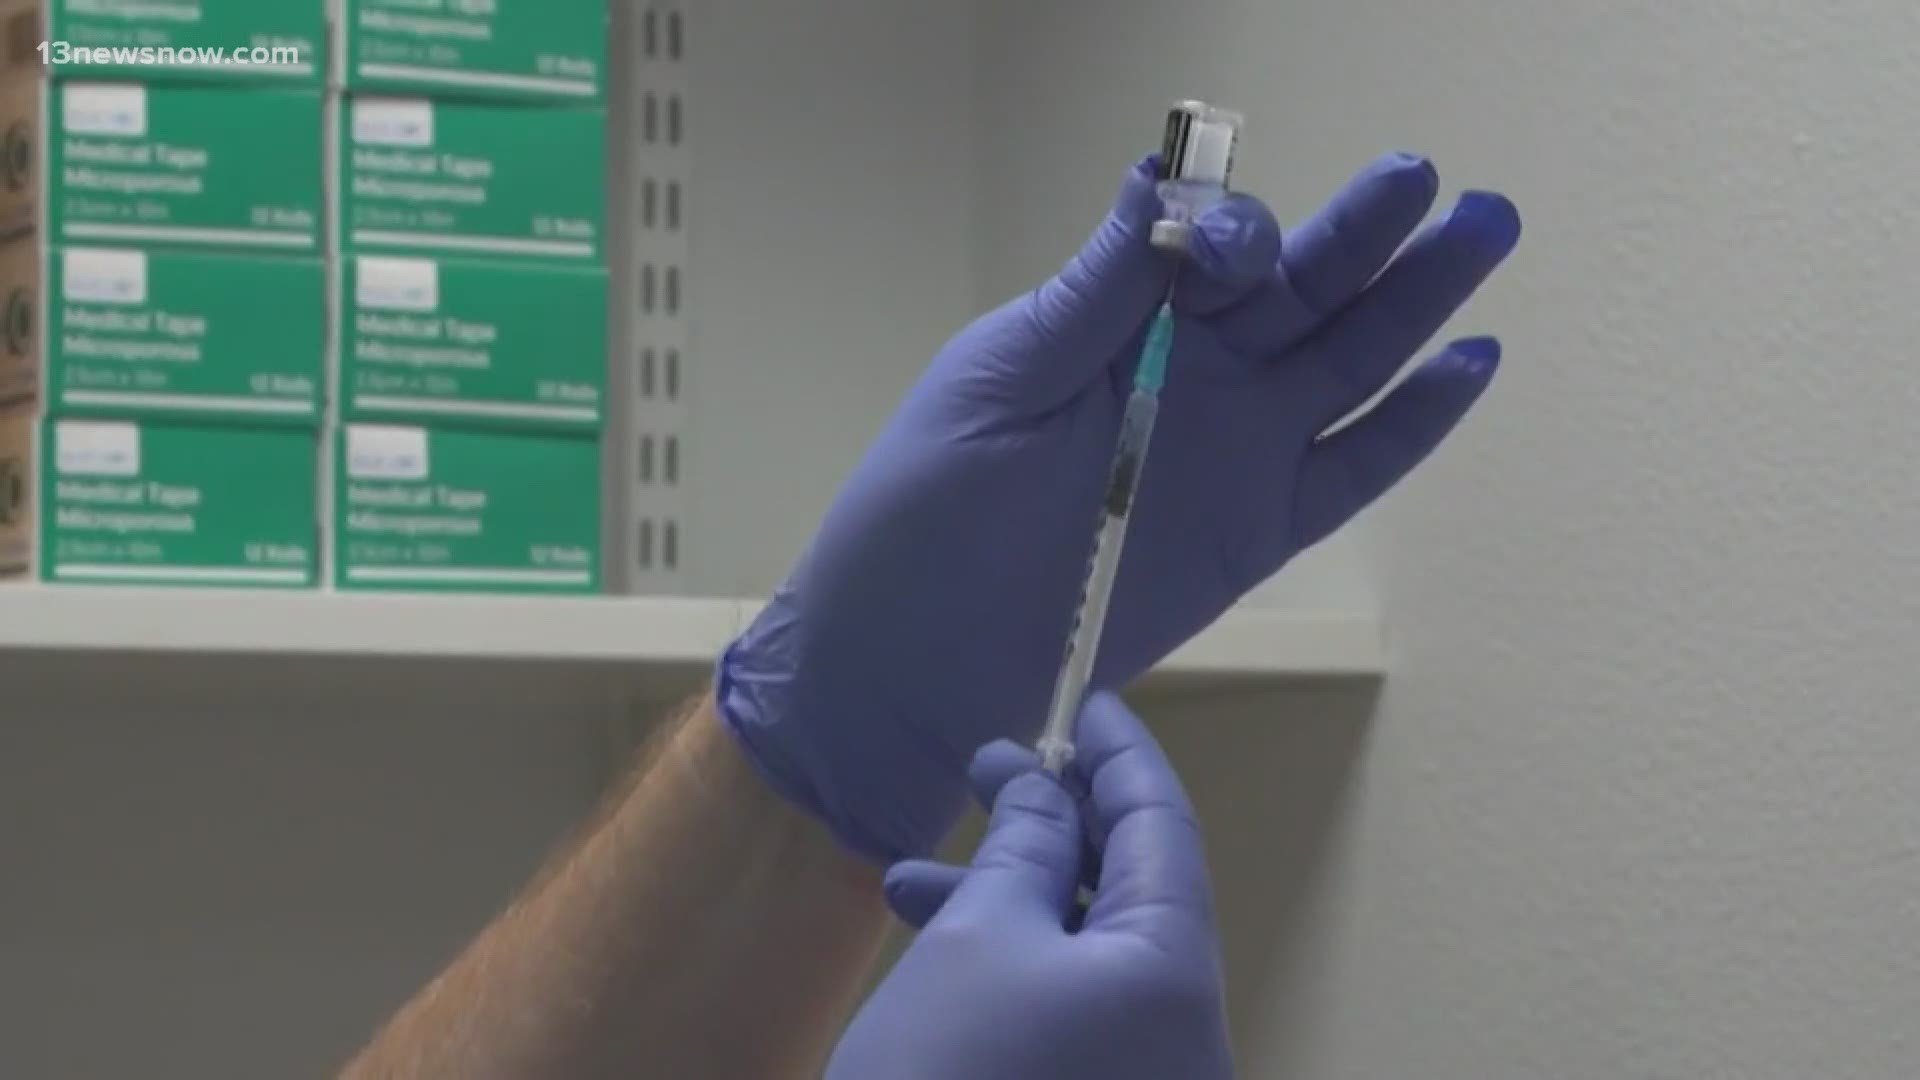 Teens ages 16 and 17 can get the Pfizer vaccine. Vaccinations among teenagers could play into the success of the next school year. 13News Now Dana Smith has more.